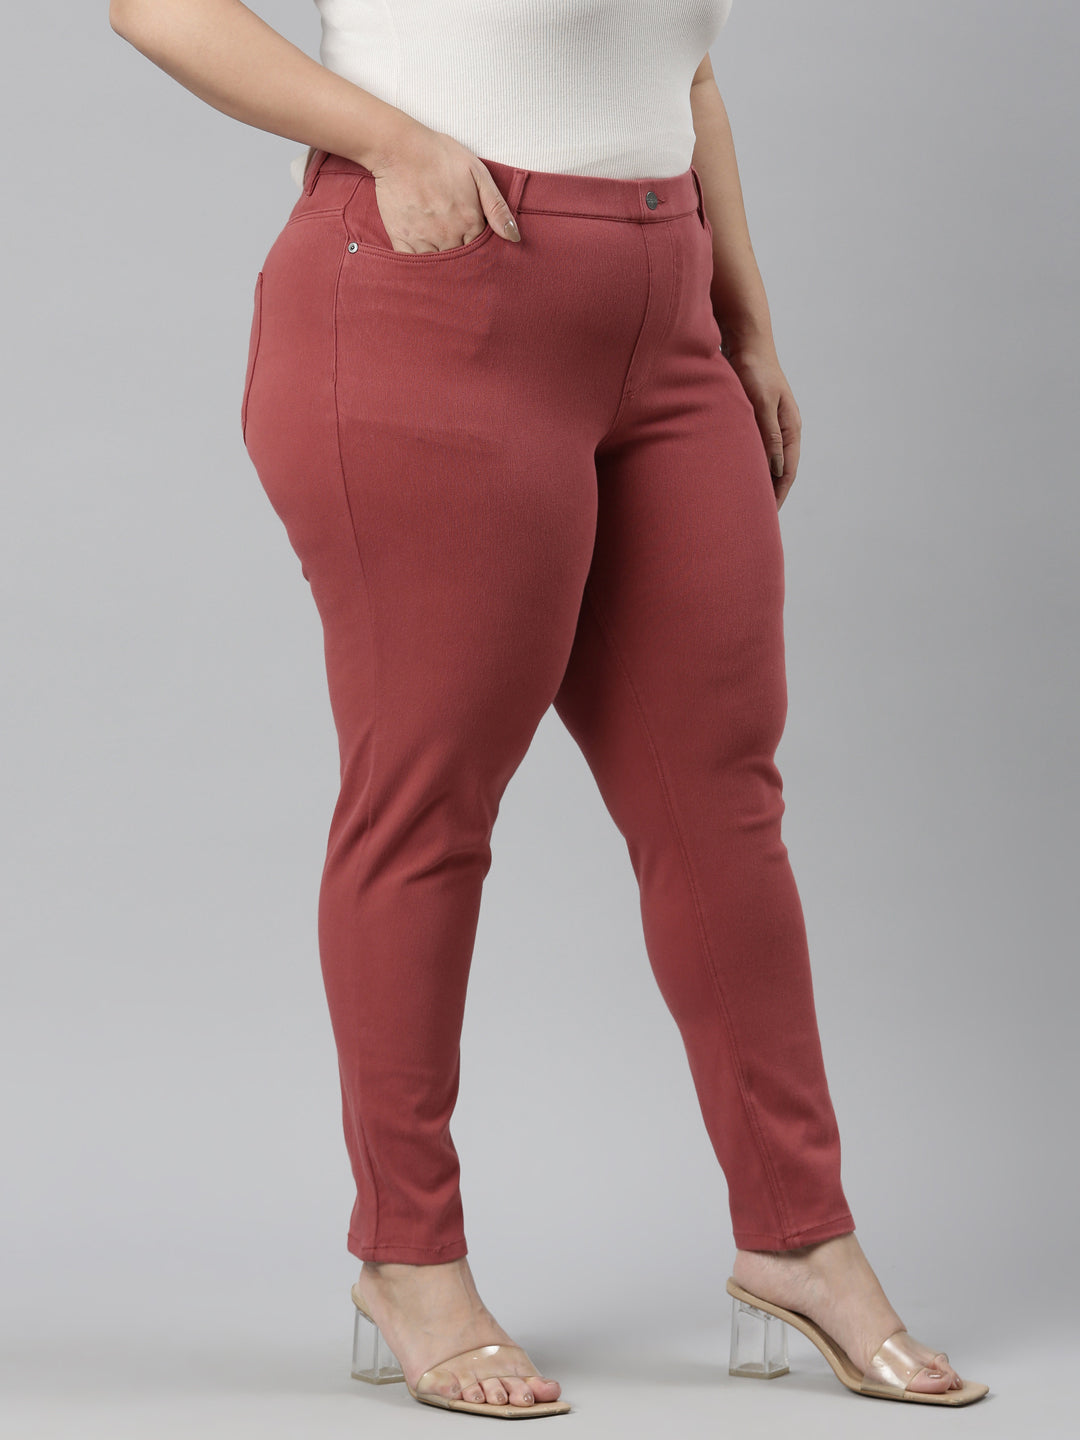 Rzlecort Red Jegging Price in India - Buy Rzlecort Red Jegging